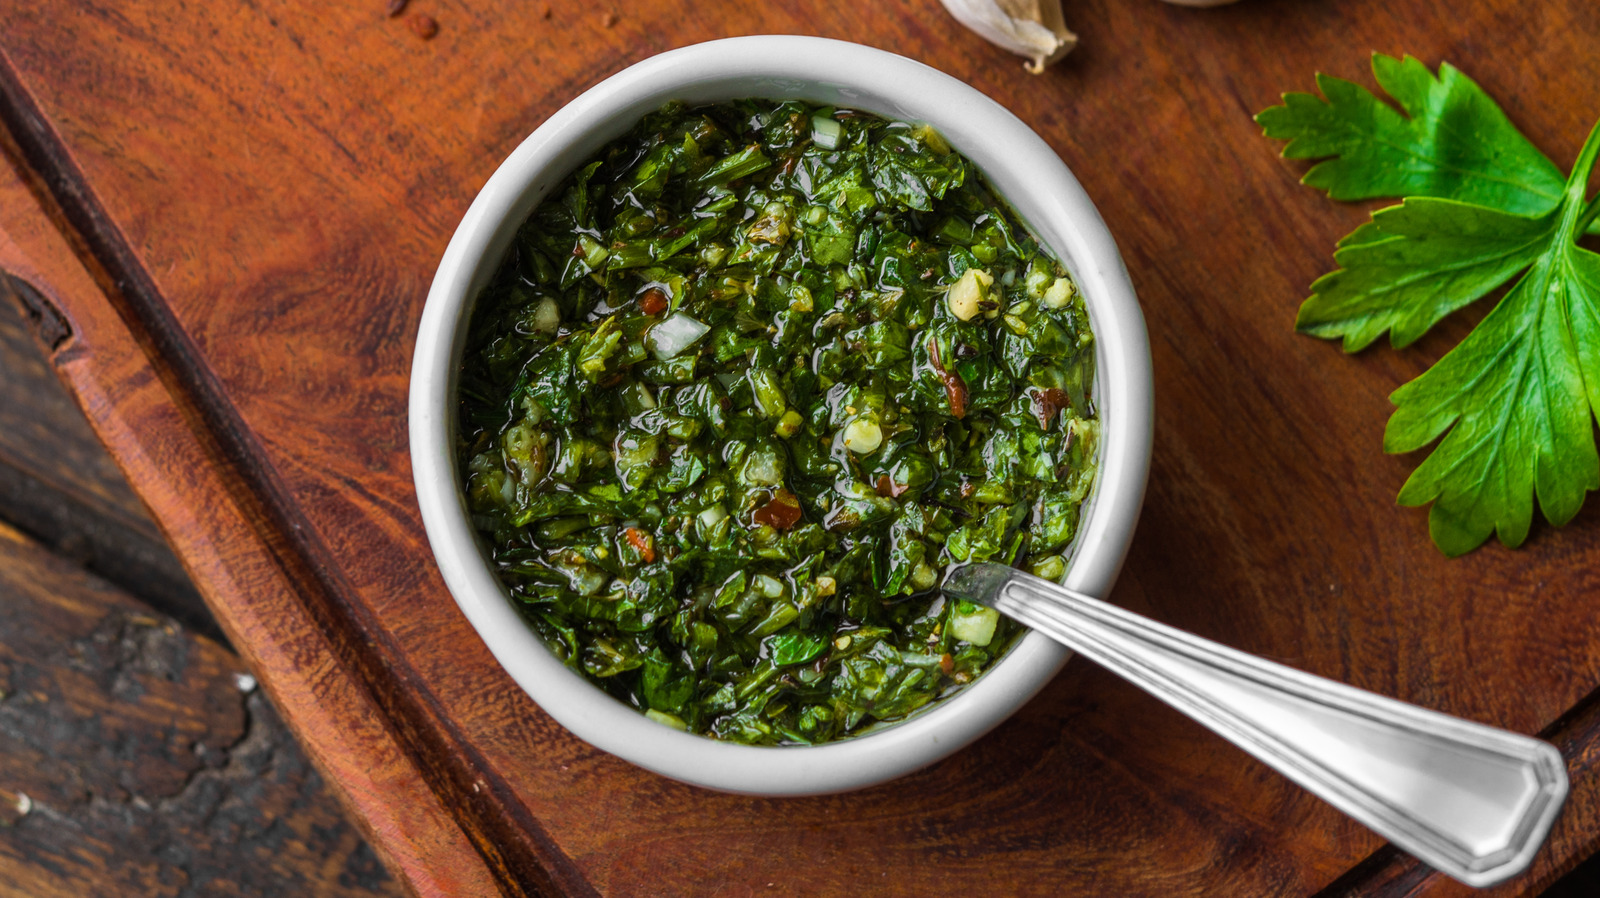 Add cabbage to chimichurri sauce for an earthy take on a classic